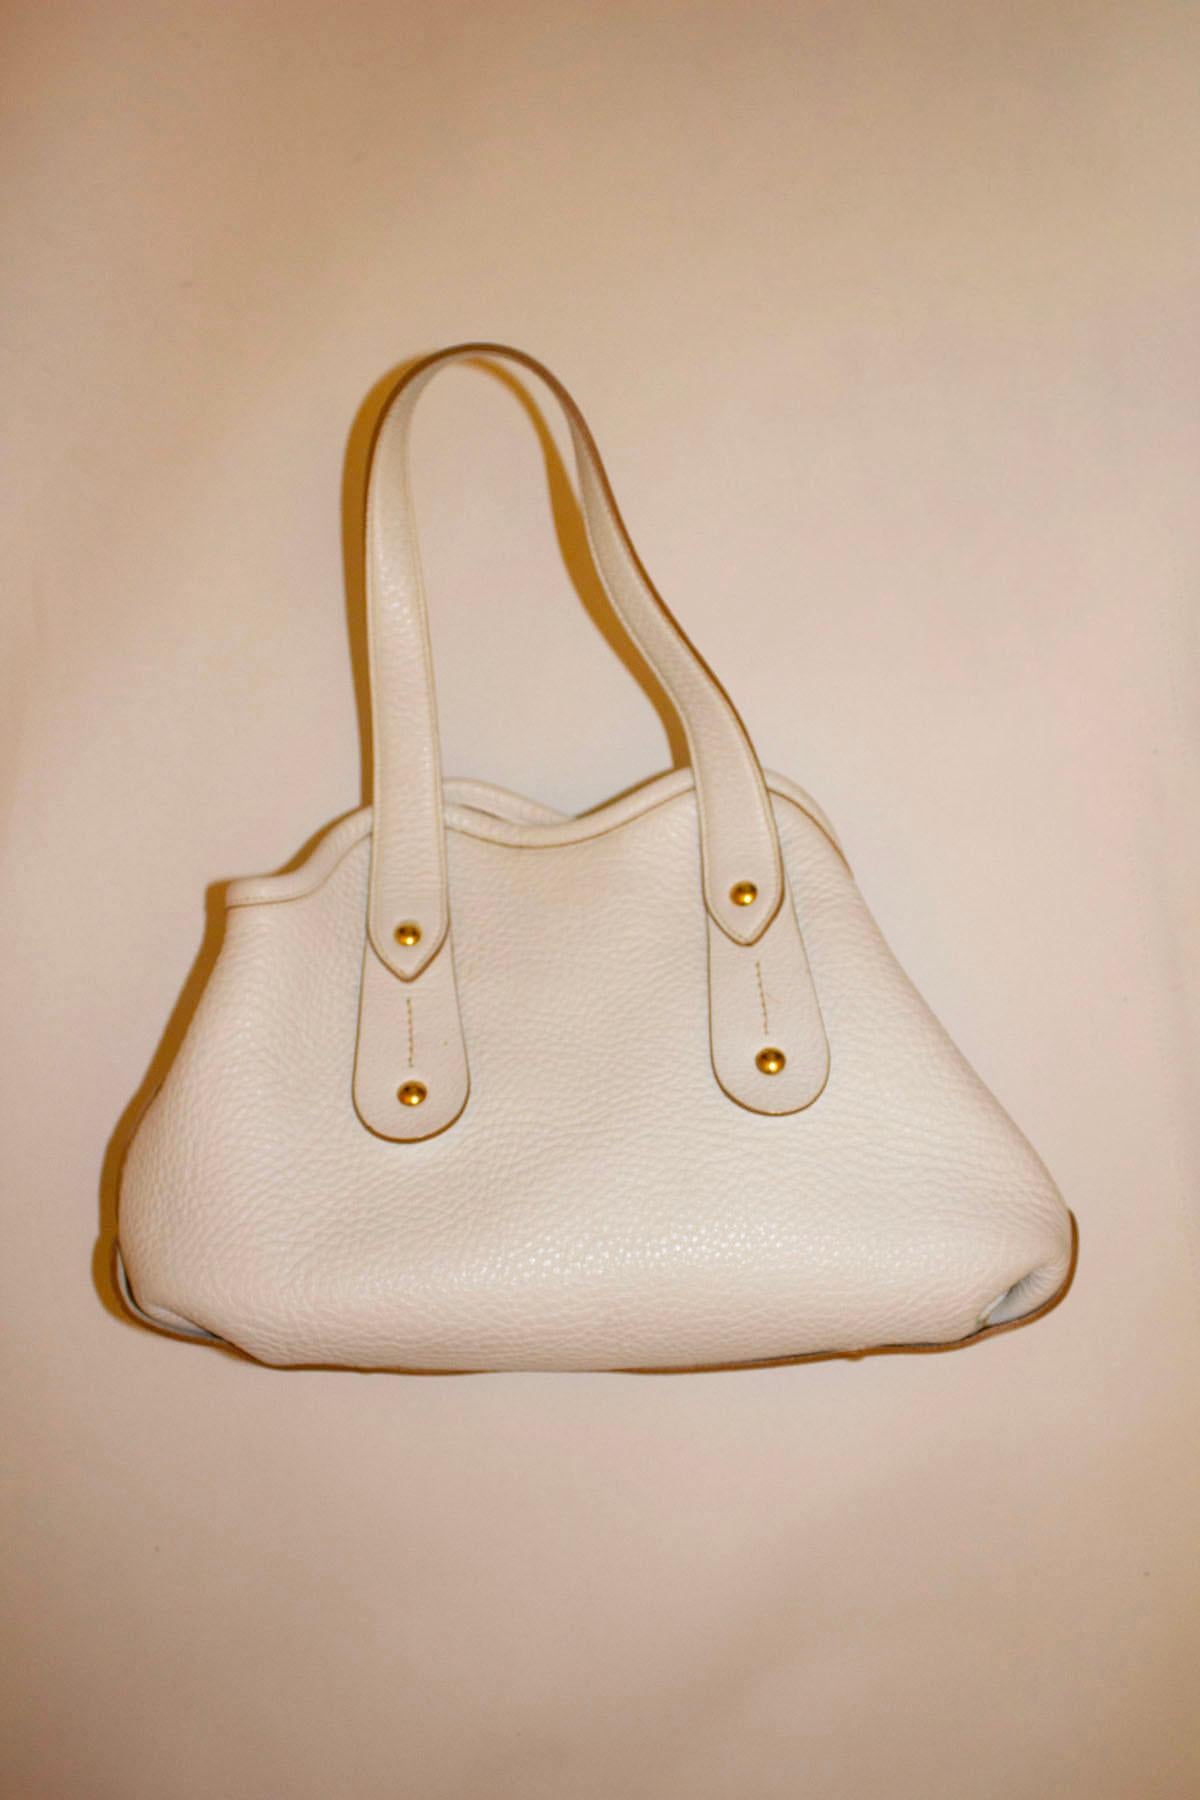 A wonderful bag for Spring / Summer by Salvatore Ferragamo. In a wonderful soft white leather, the bag has no frame but has an internal strap to keep it in shape. It has an internal pocket, two handles and is unlined  Model AU -217286 .